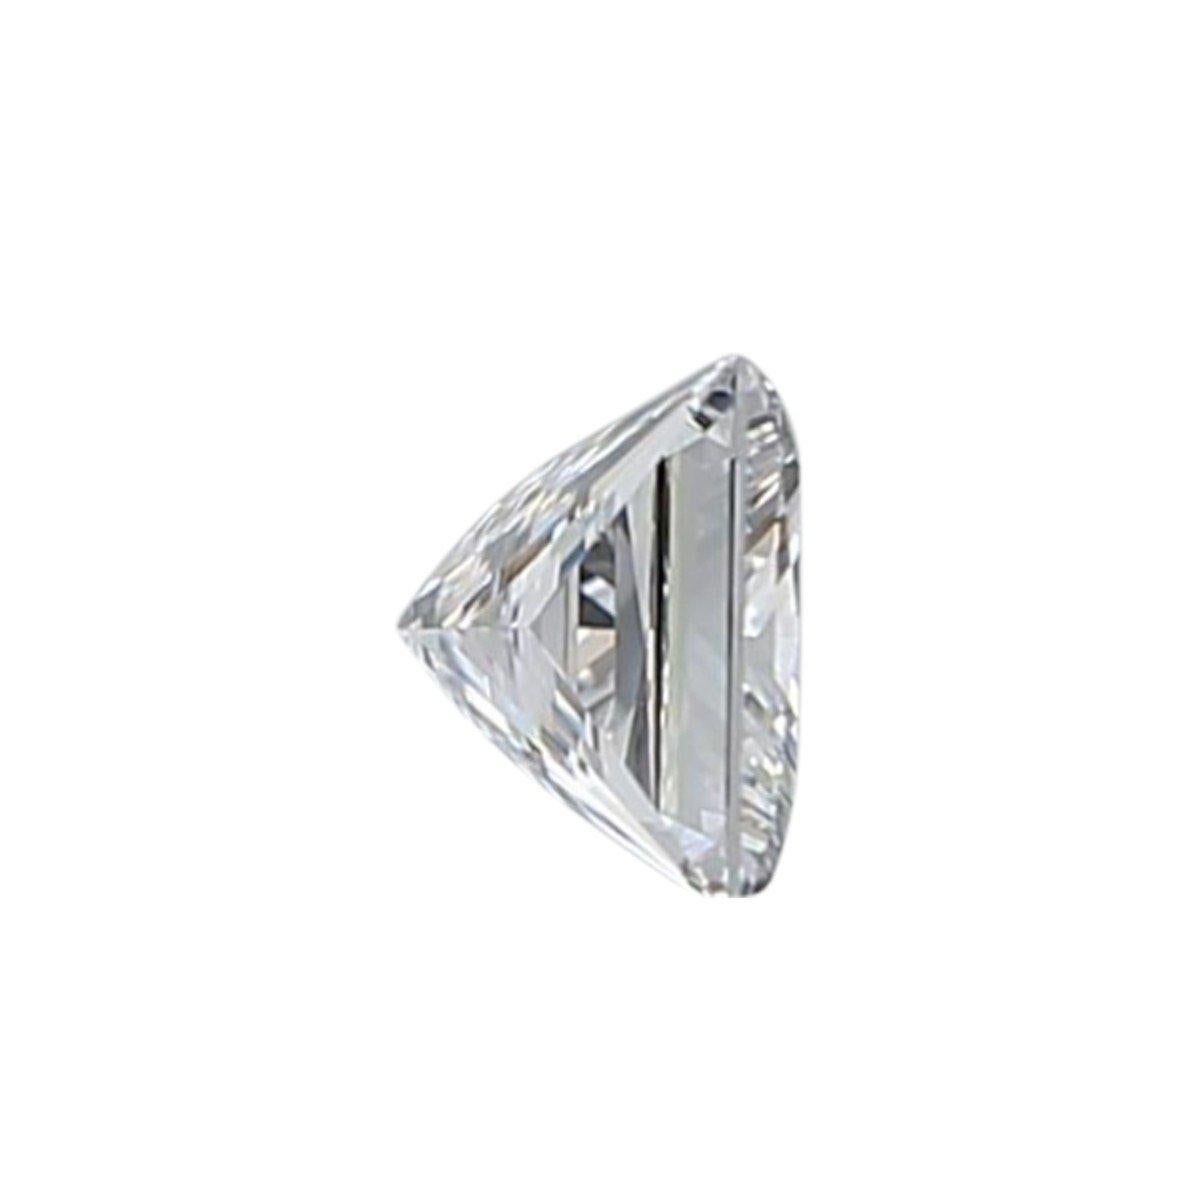 Natural princess cut diamond with full of shine and sparkles with a 0.81 carat E VS1 Grading with GIA Certificate and laser inscription number.

Top Make

GIA 5296667197

Sku: DSPV-279